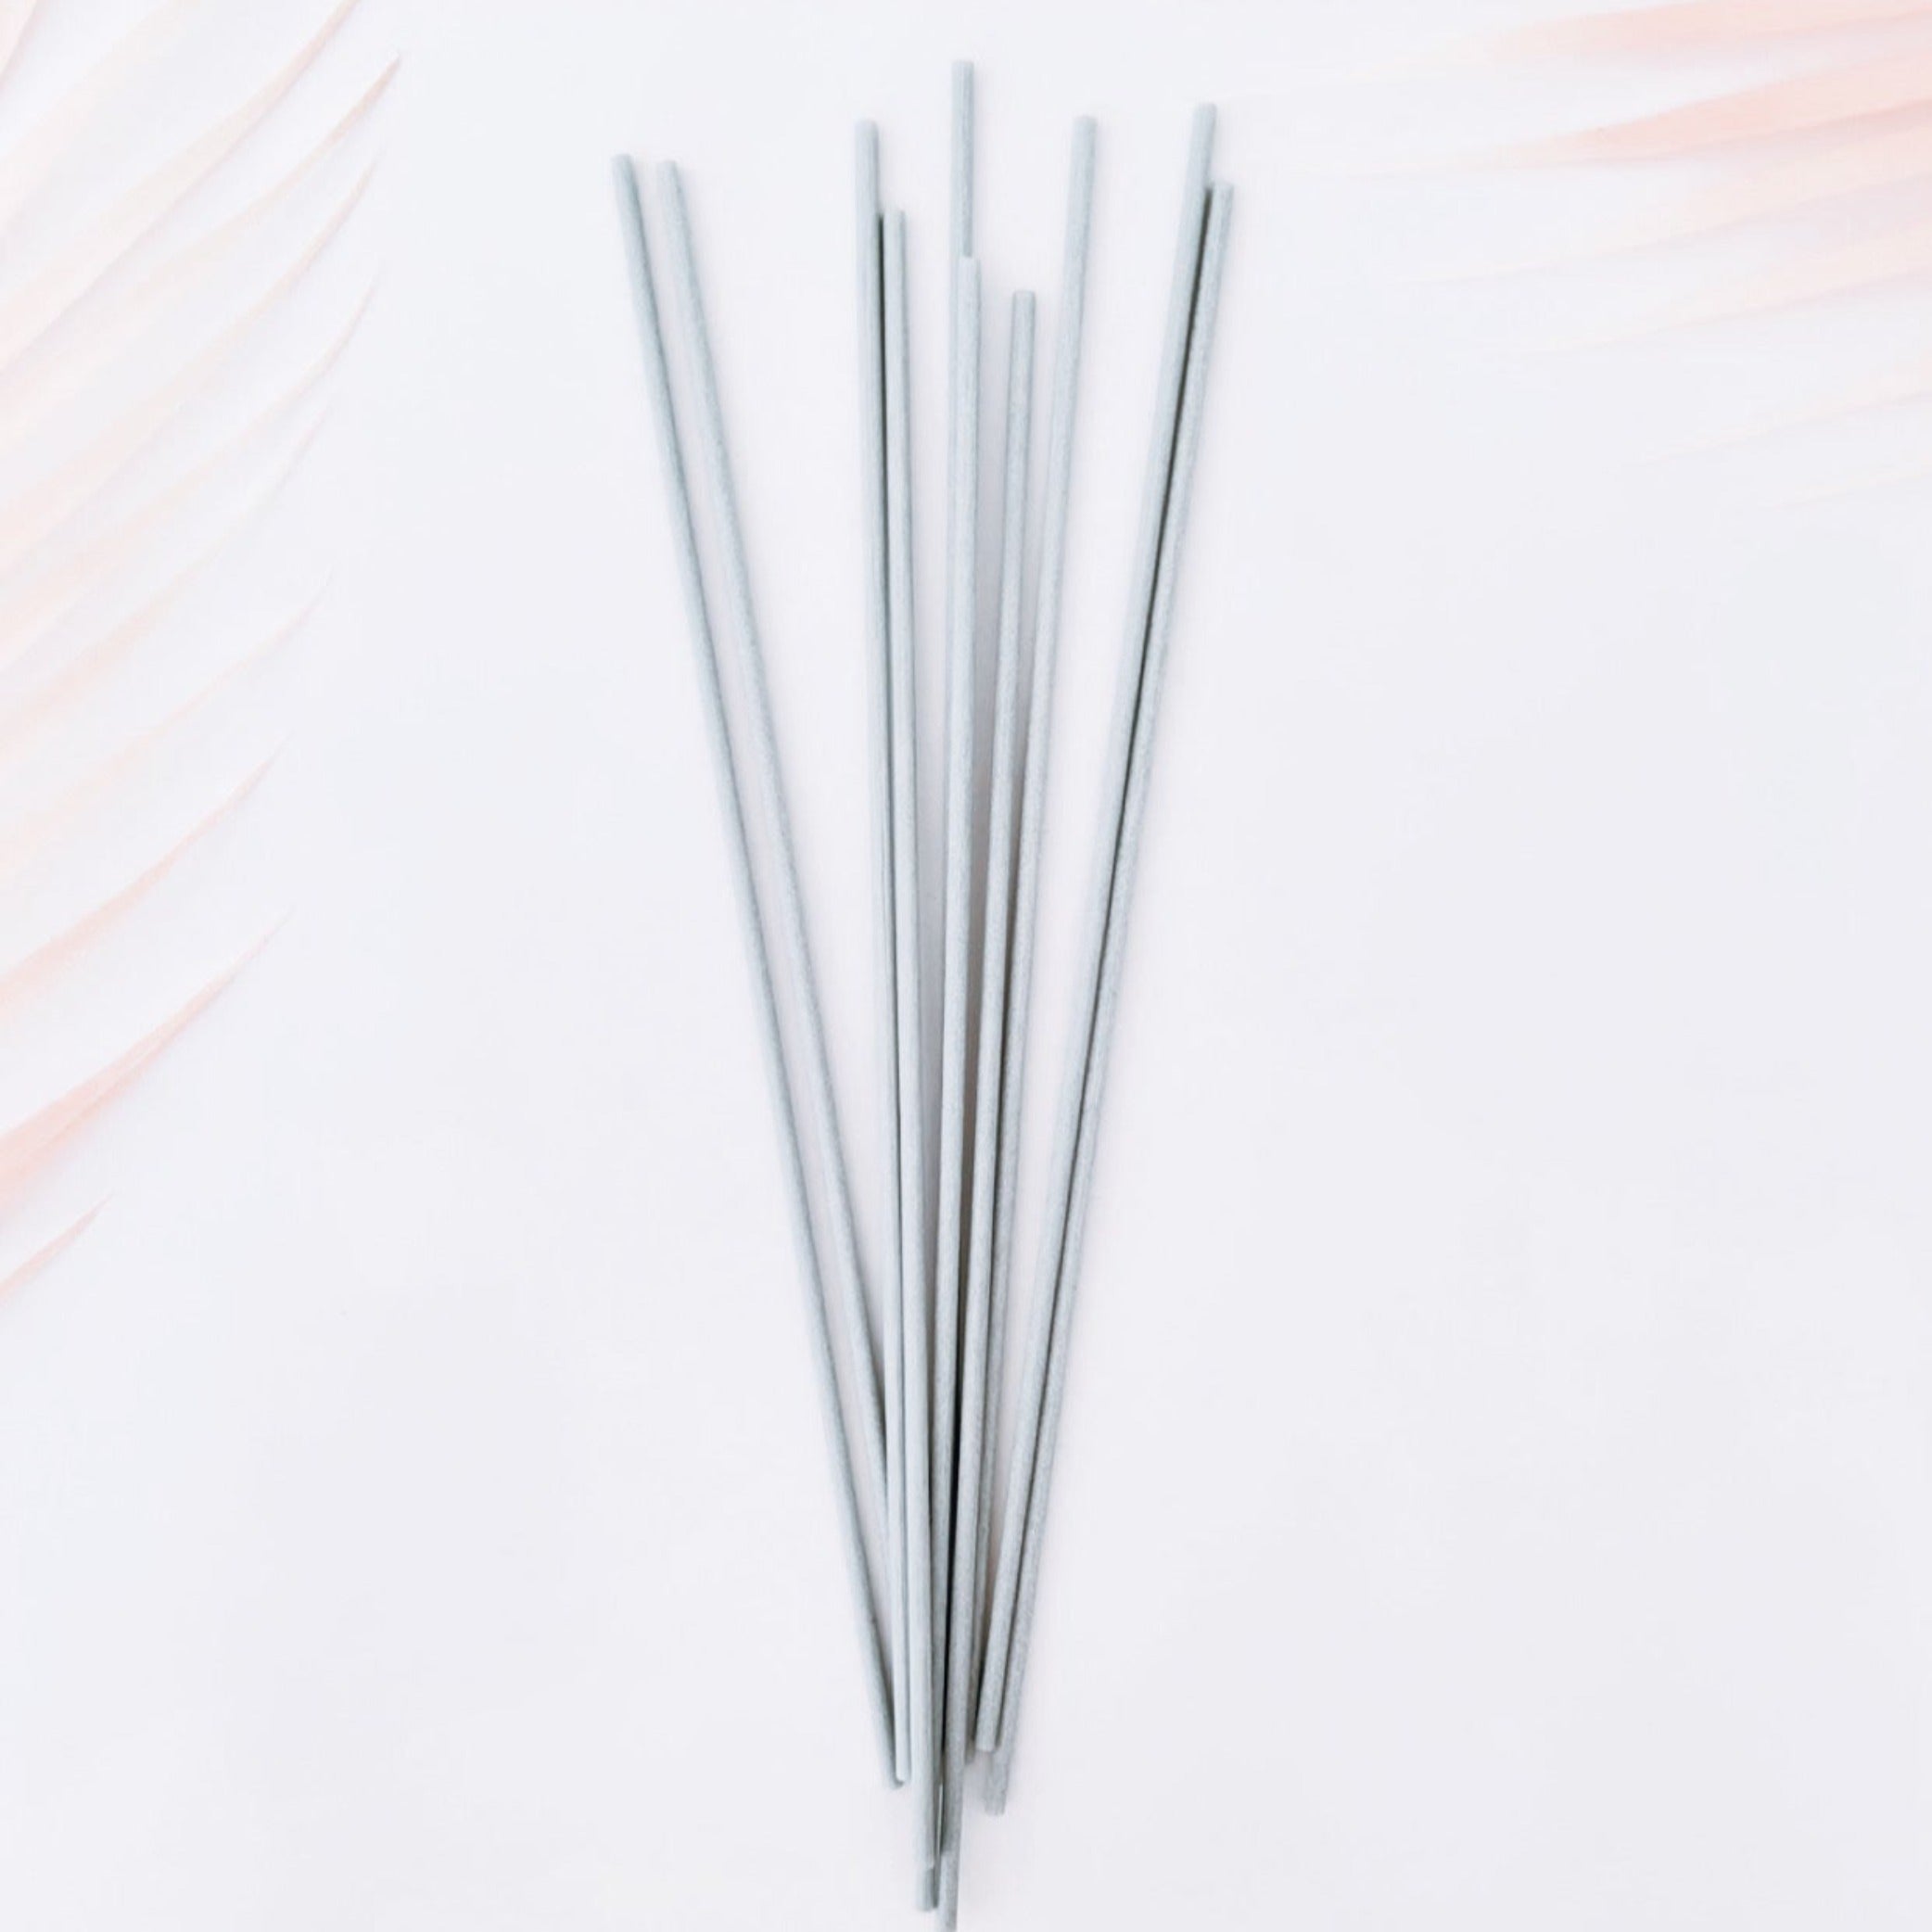 REED STICKS FOR DIFFUSERS - PACK OF 10